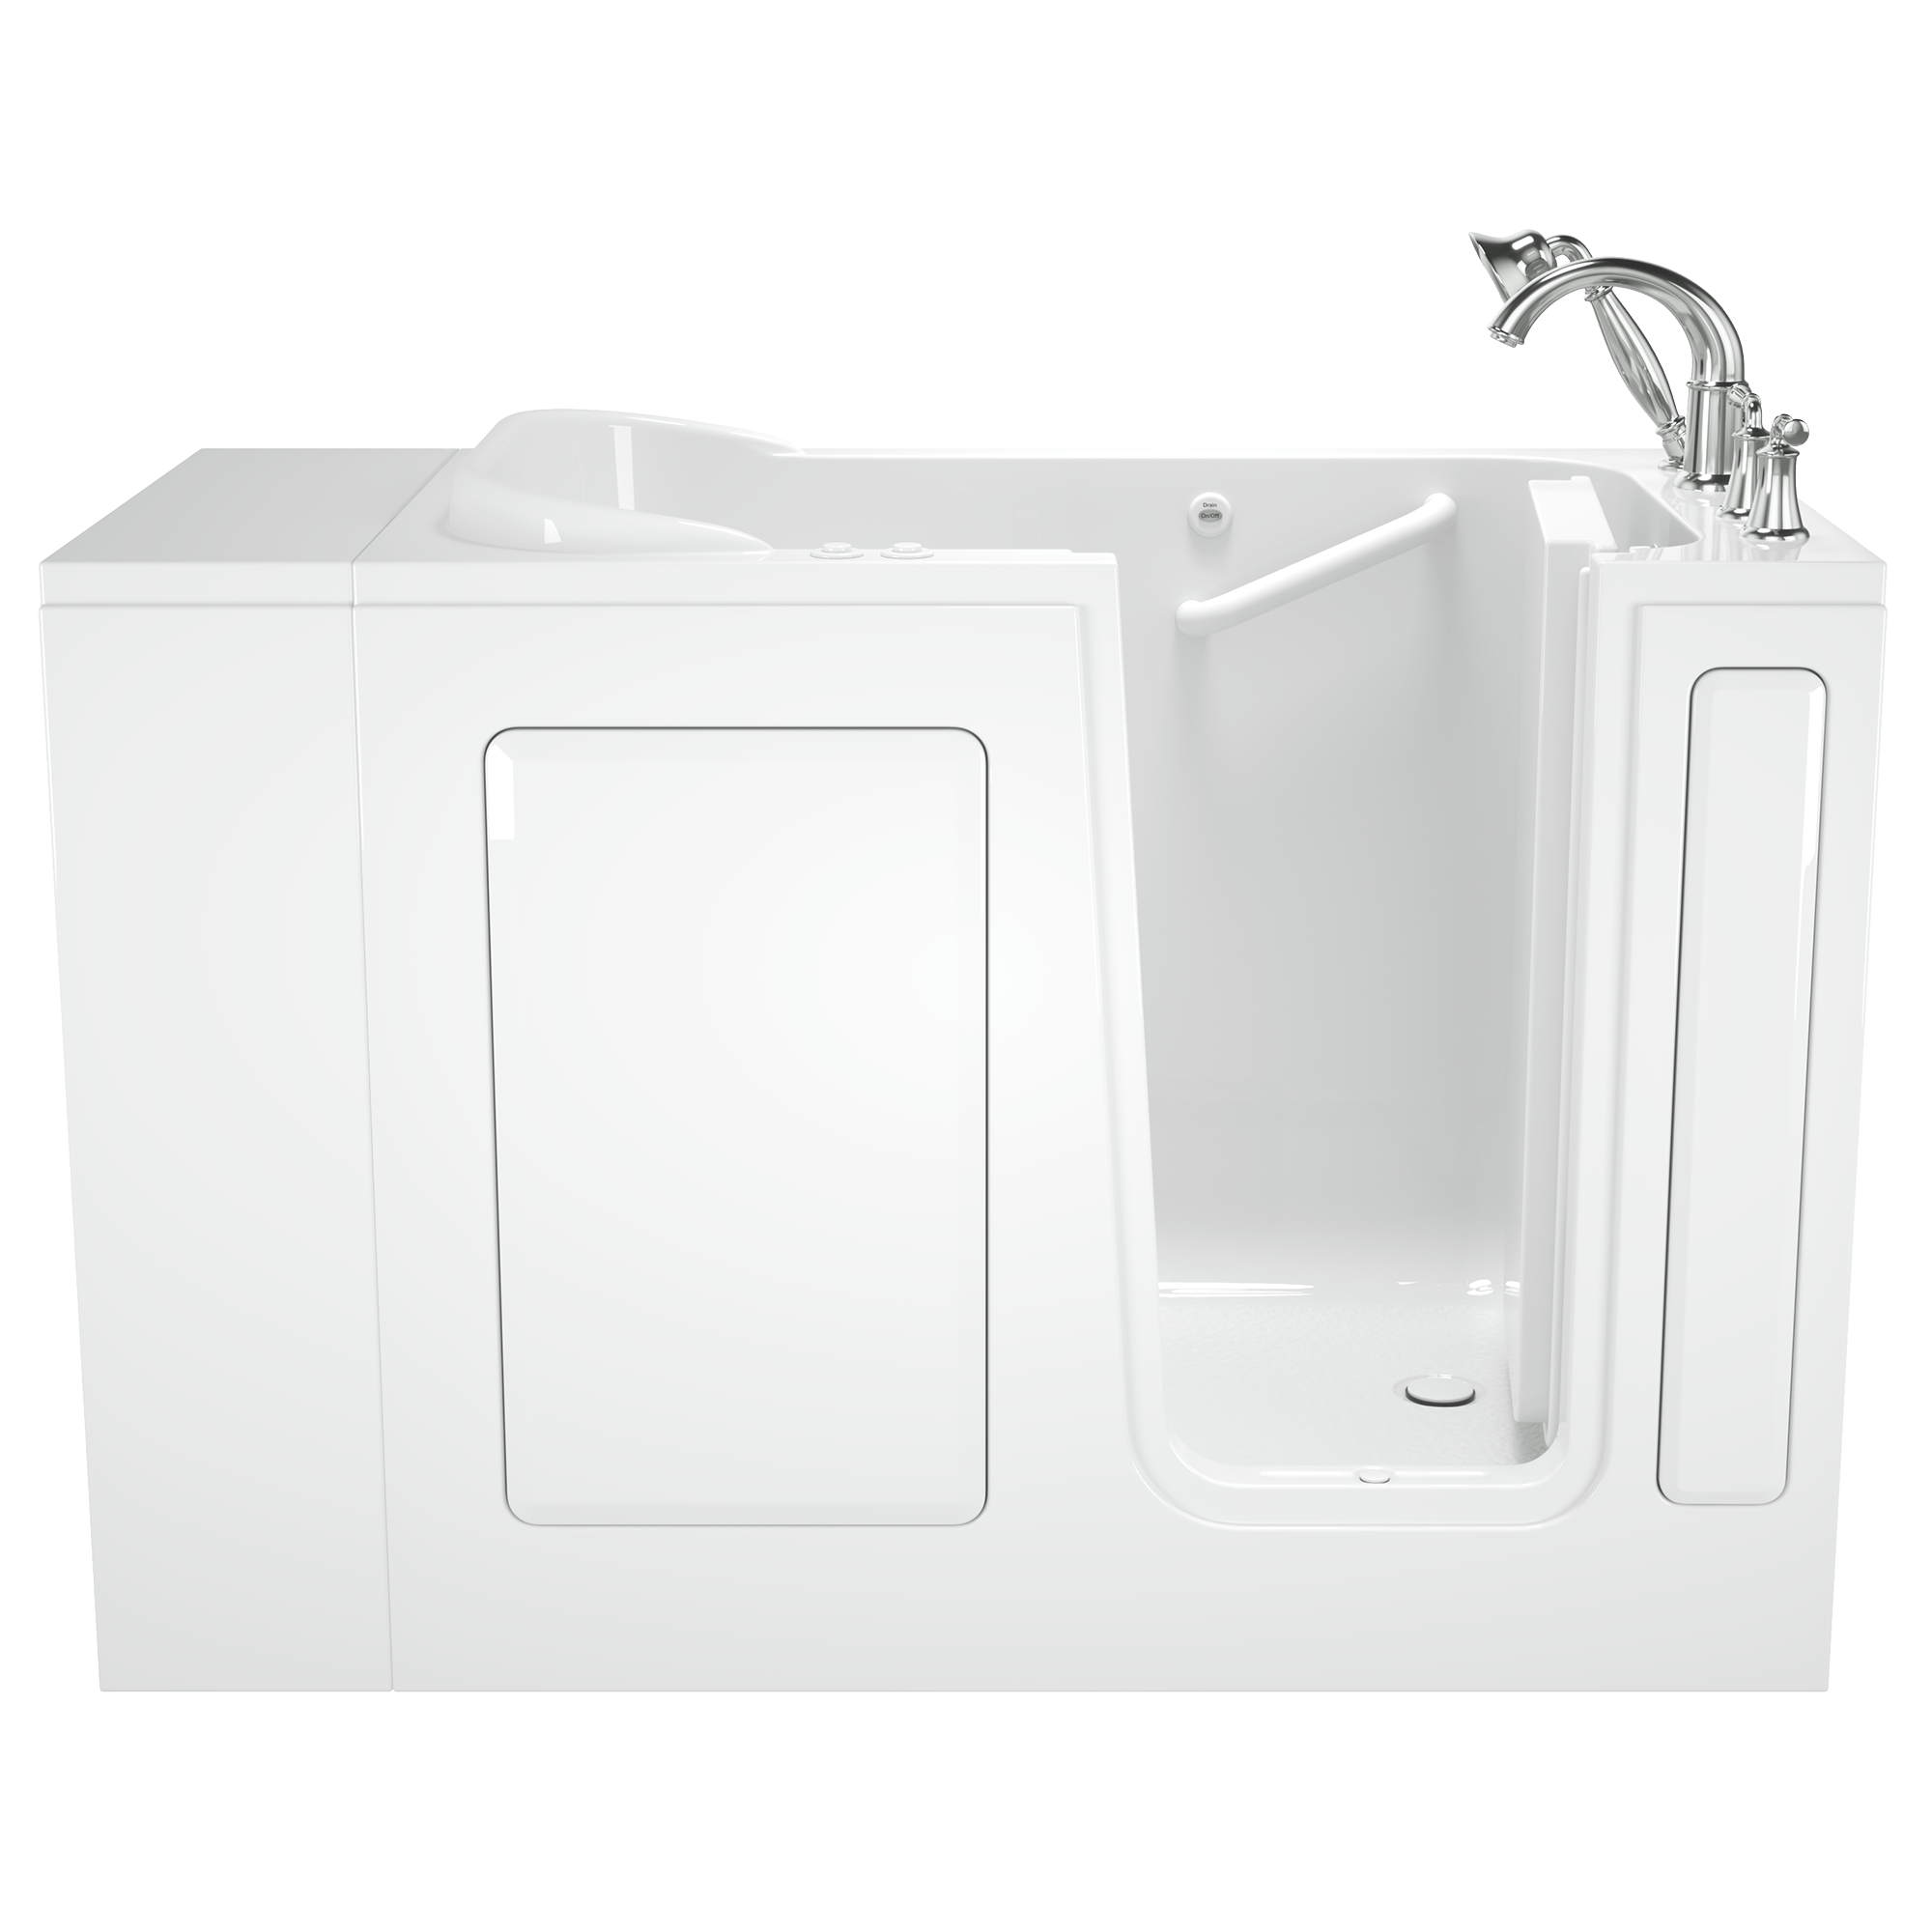 GEL Walk In Tub 48LX28WX38H Right Hand DUAL White ST WHITE